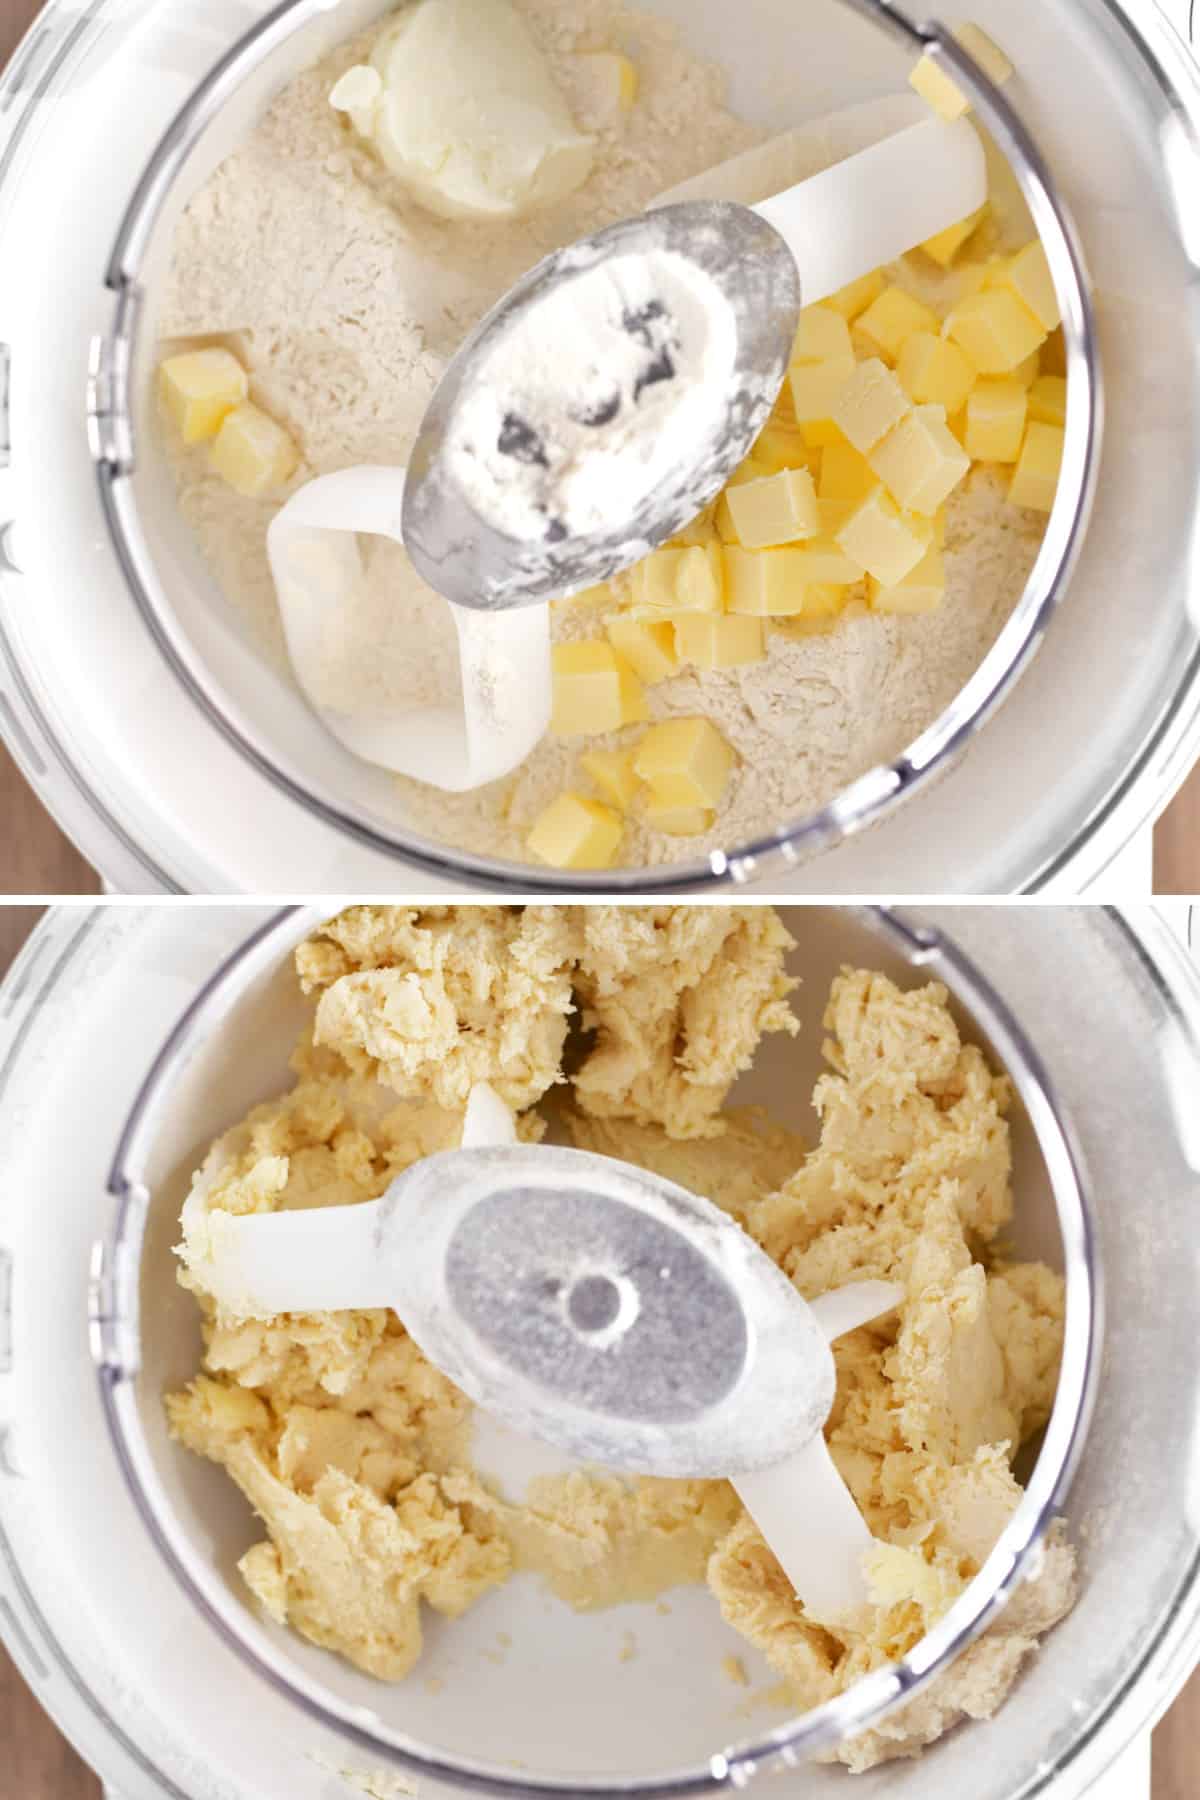 Mixing dough in a stand mixer.